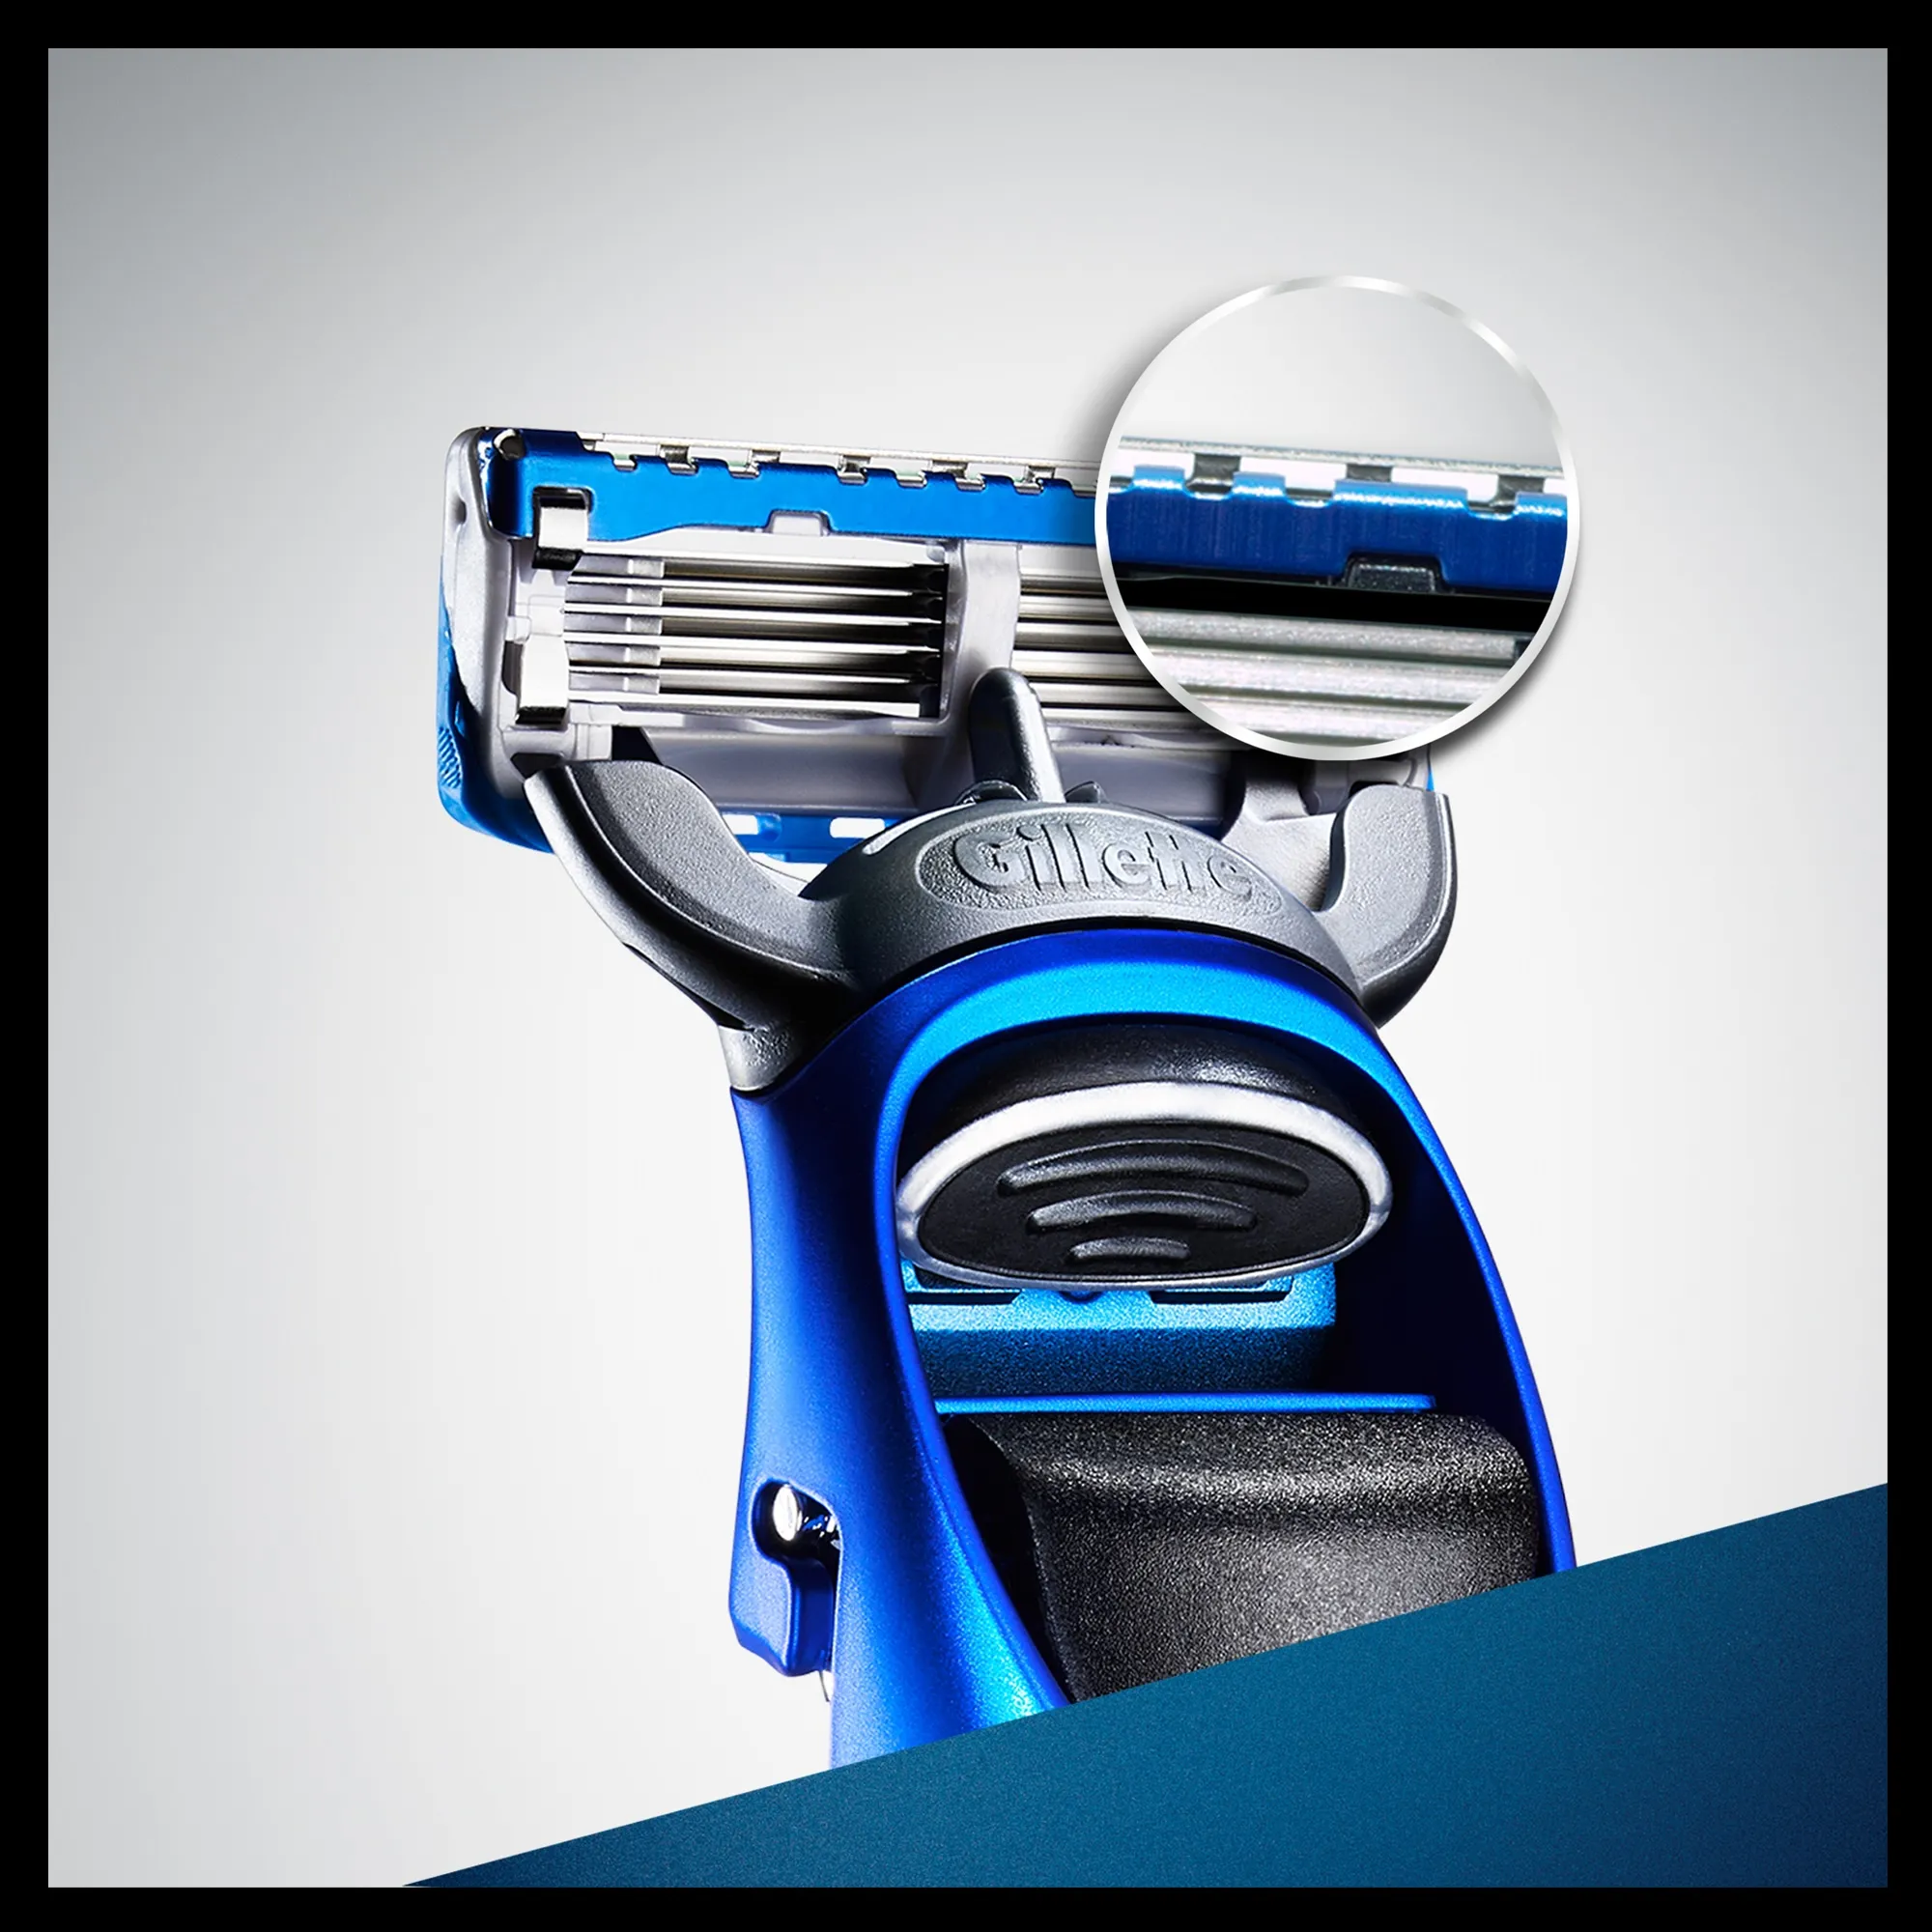 Gillette Fusion Styler 3in1 1×1